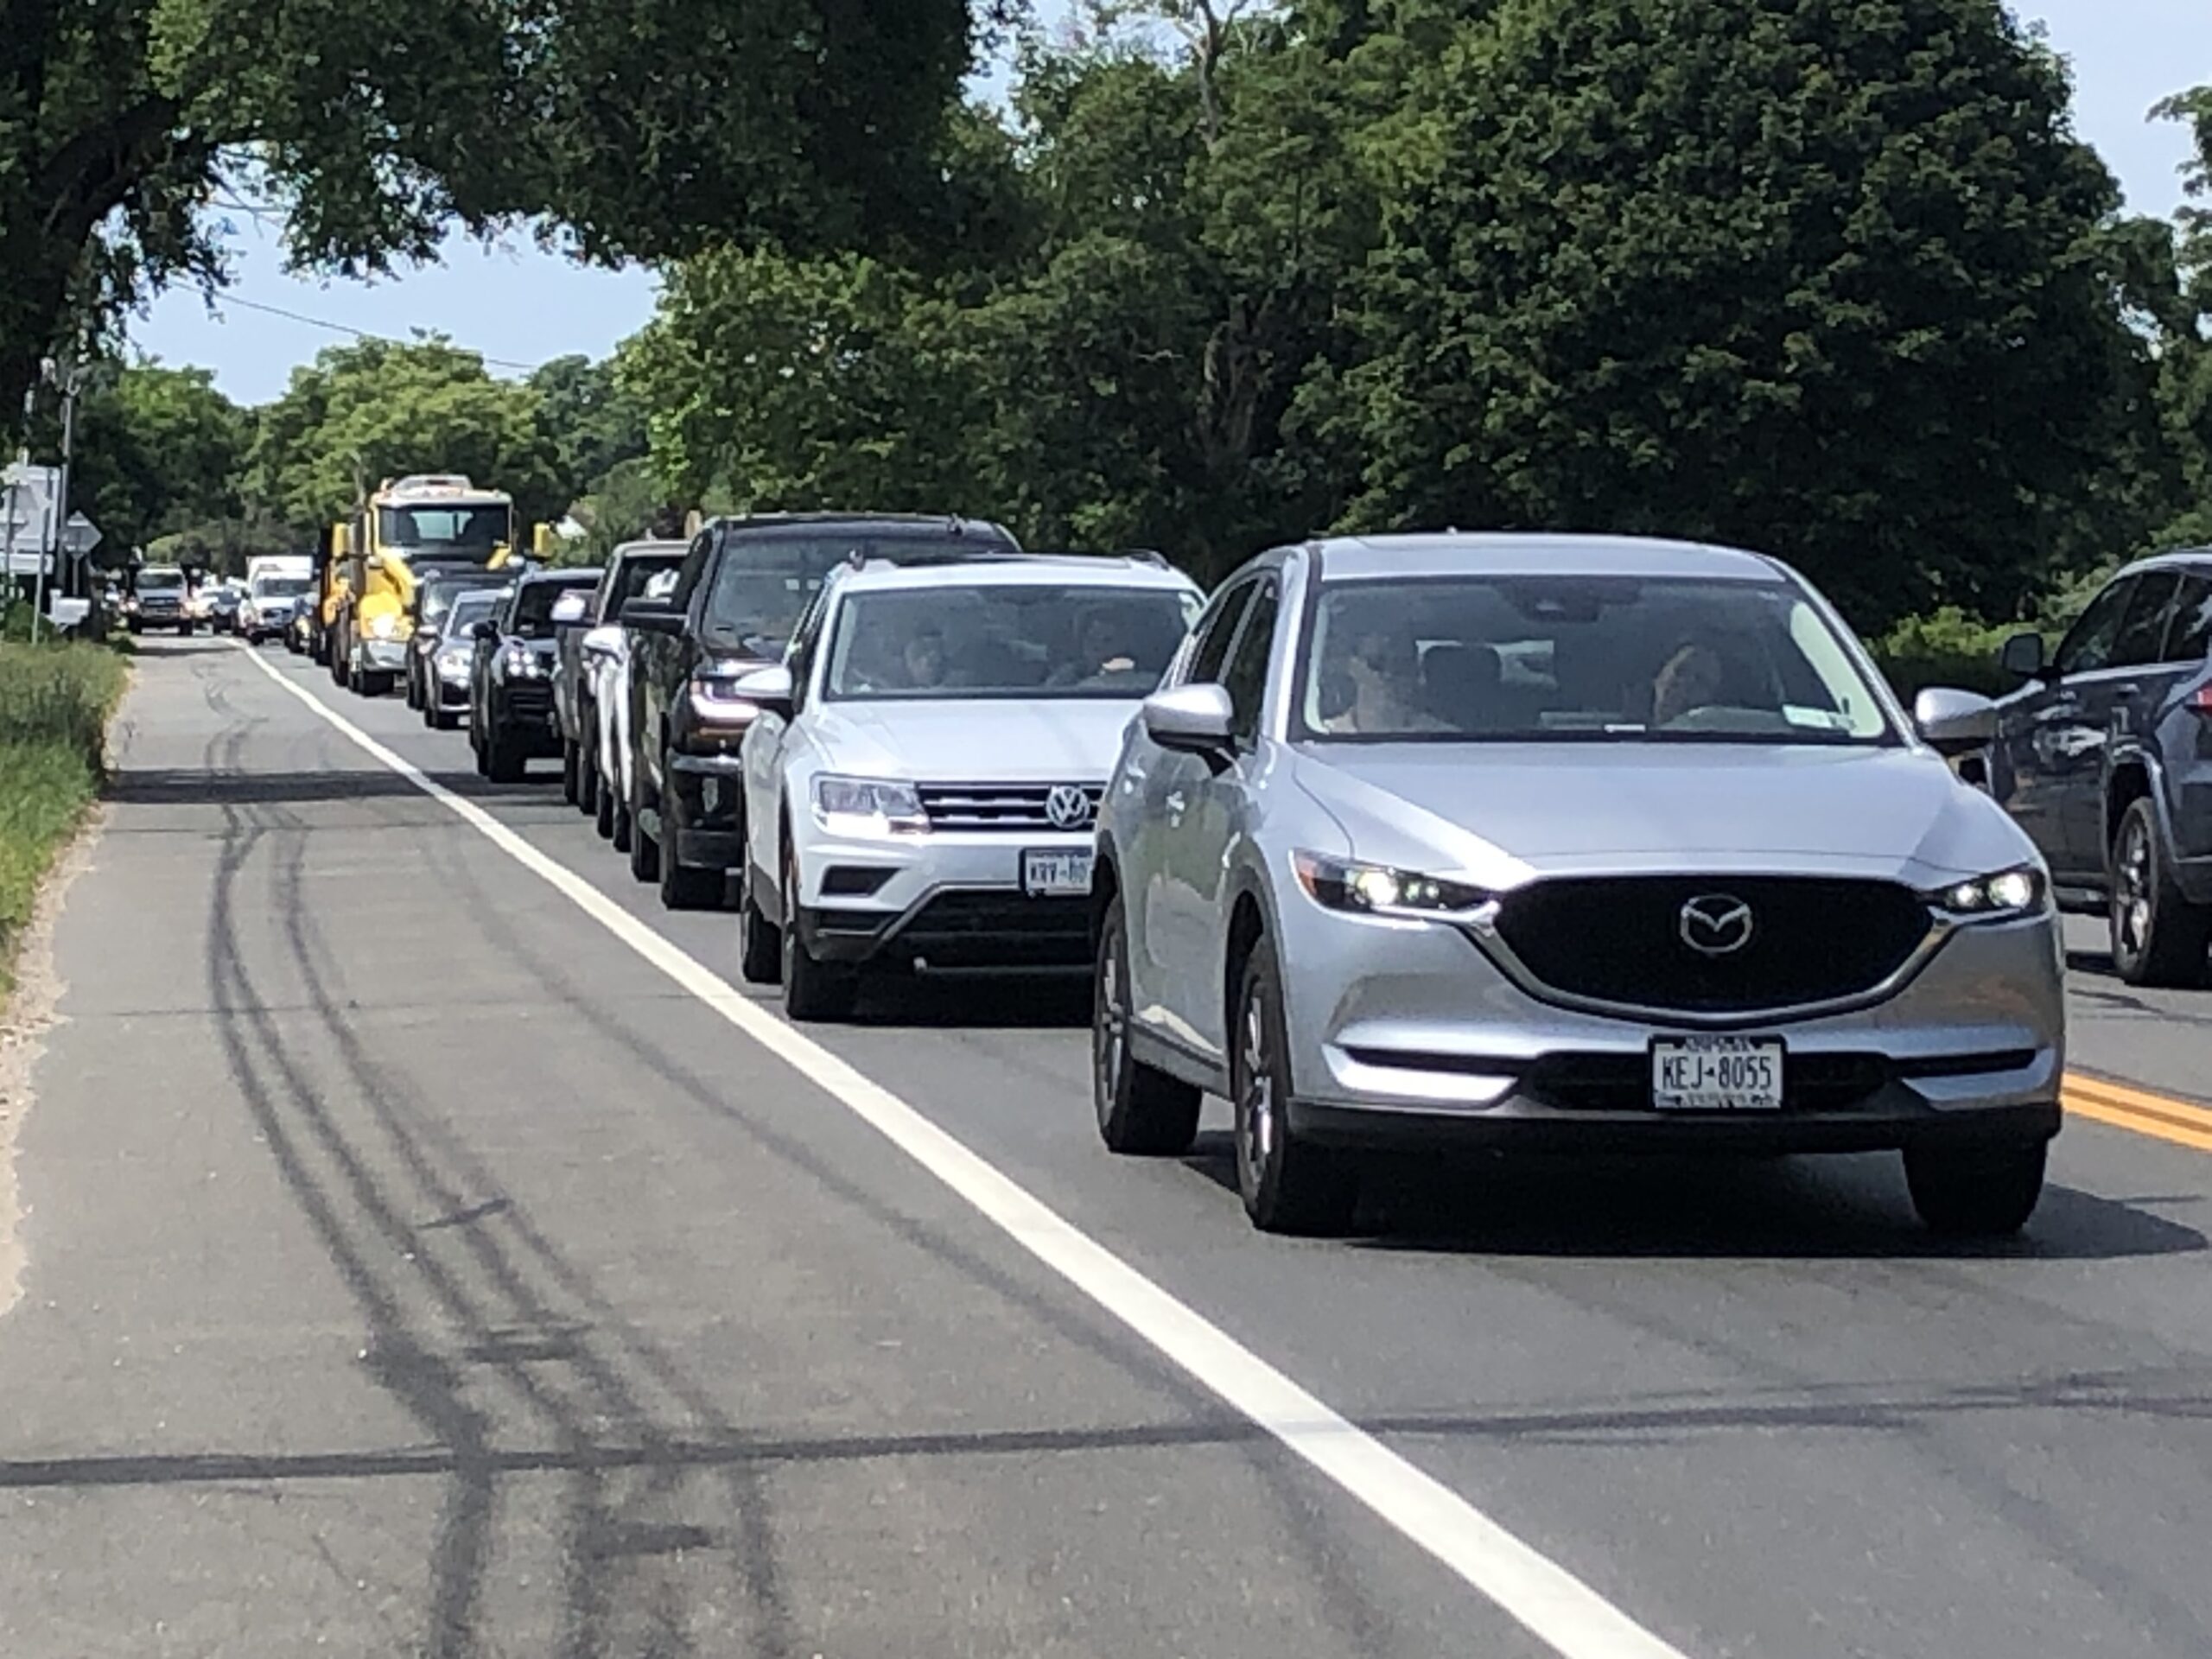 Traffic congestion on Long Island is anticipated to increase significantly over the next 25 years, wasting even more time and money while burning fossil fuels and contributing to climate change. JENNY NOBLE